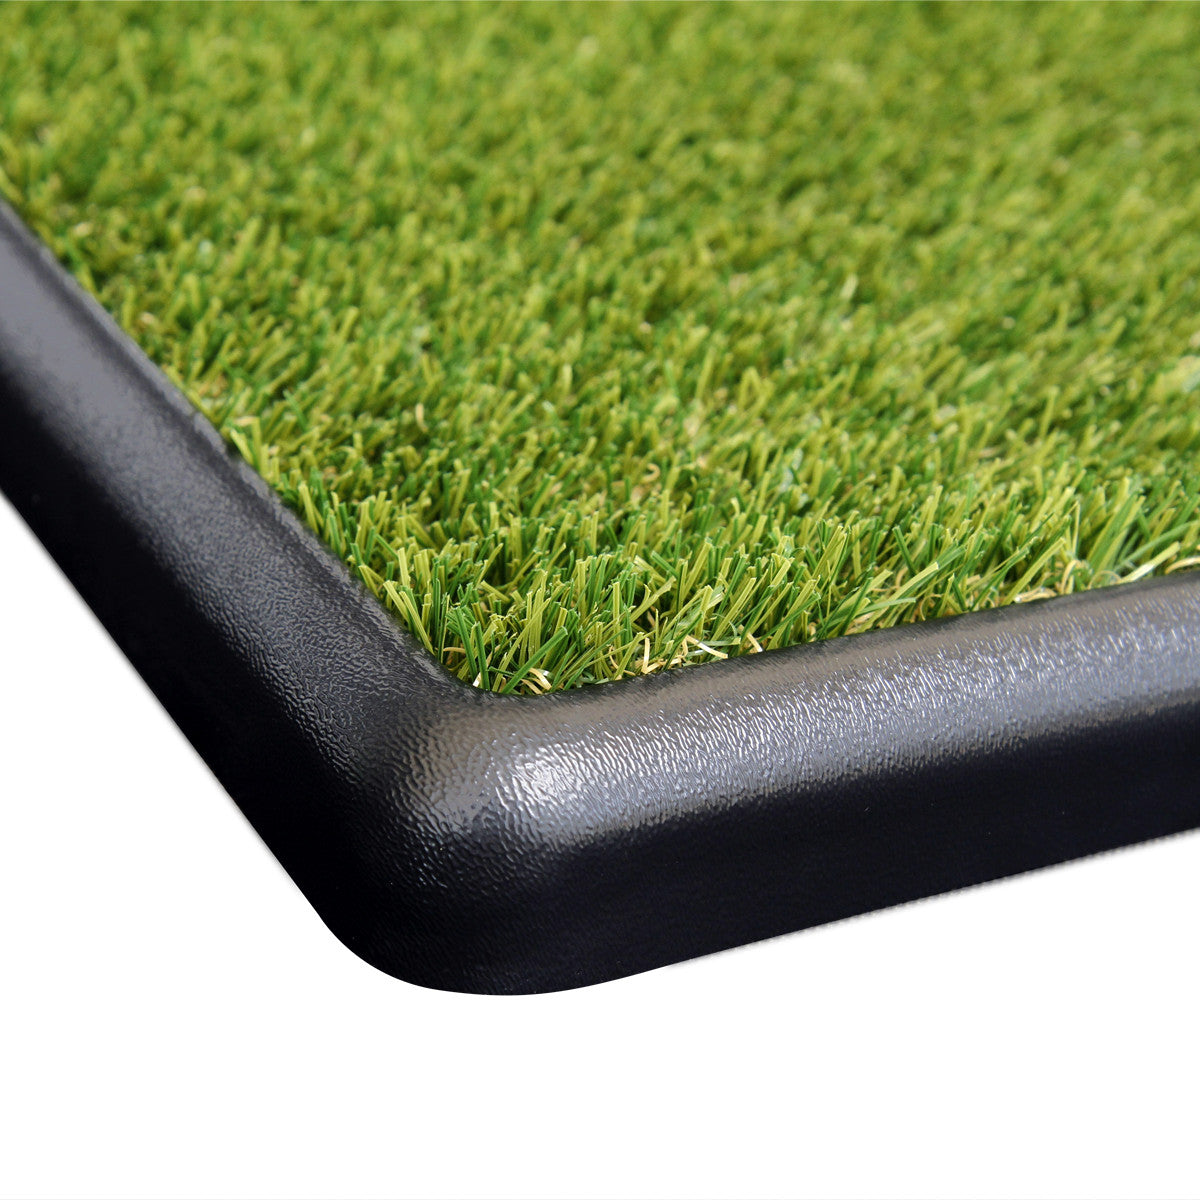 Grass sits flush with the top of the tray